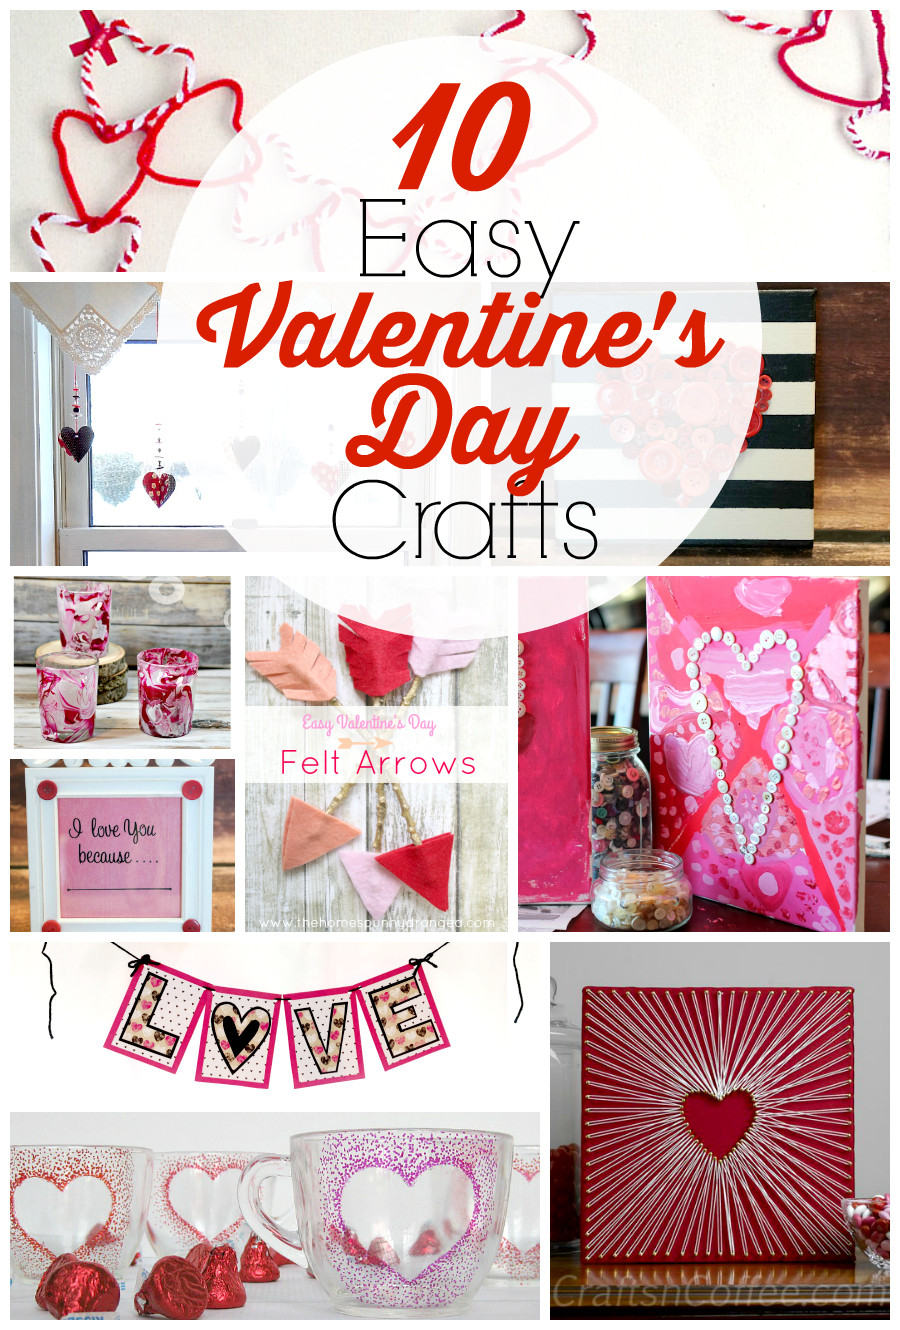 February Craft Ideas For Adults
 10 Easy Valentine’s Day Crafts for Adults